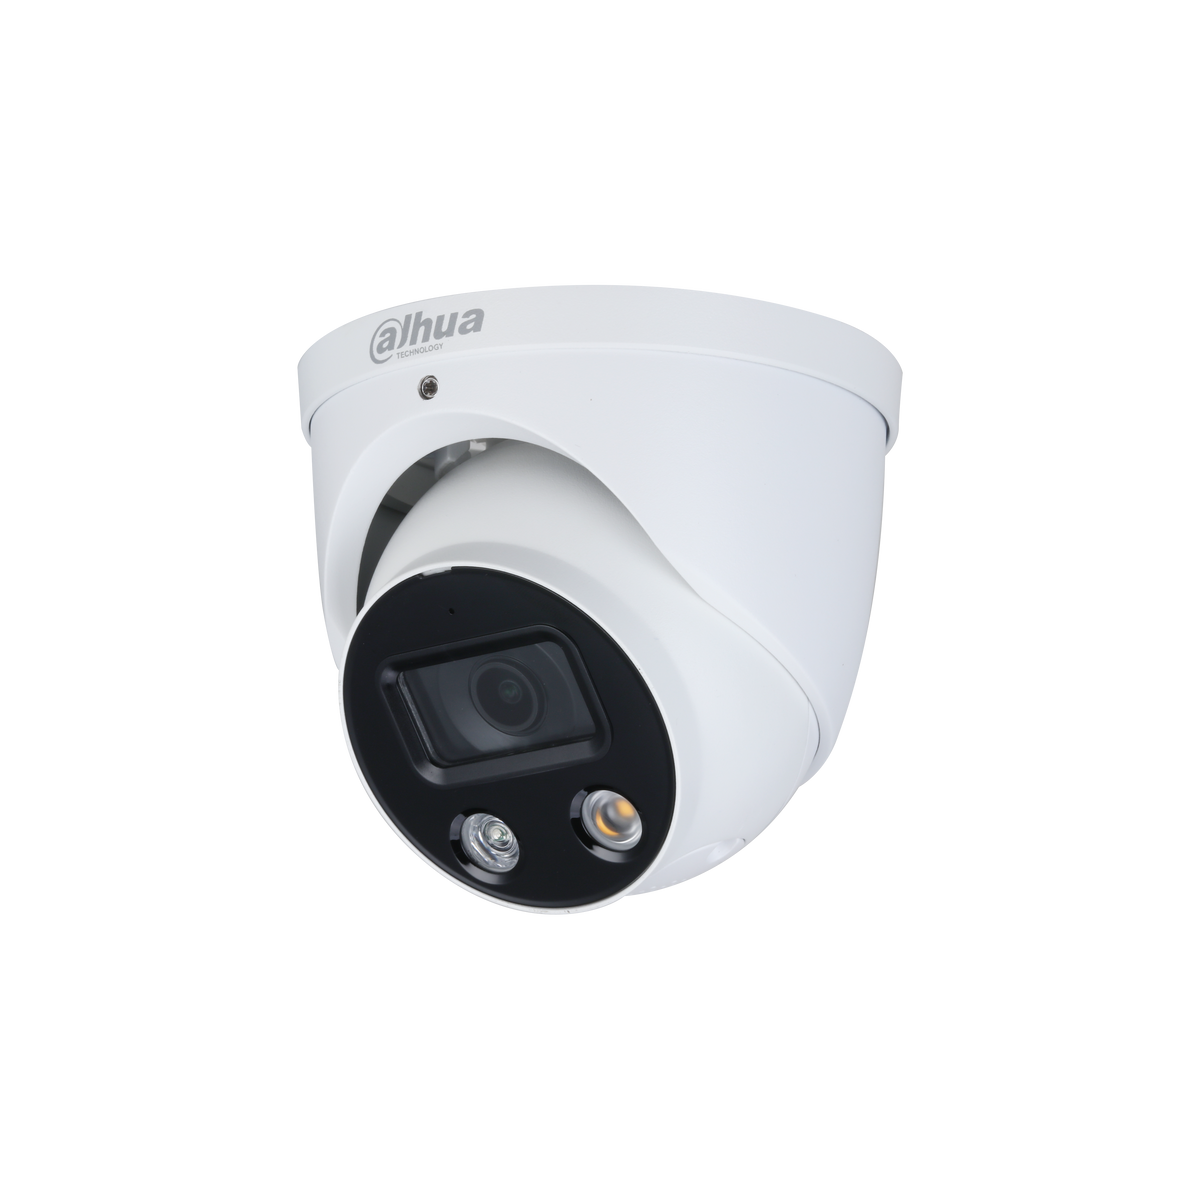 8 MP Smart Dual Illumination Active Deterrence Fixed-focal Eyeball WizSense Network Camera DH-IPC-HDW 3849 HP-AS-PV-S3